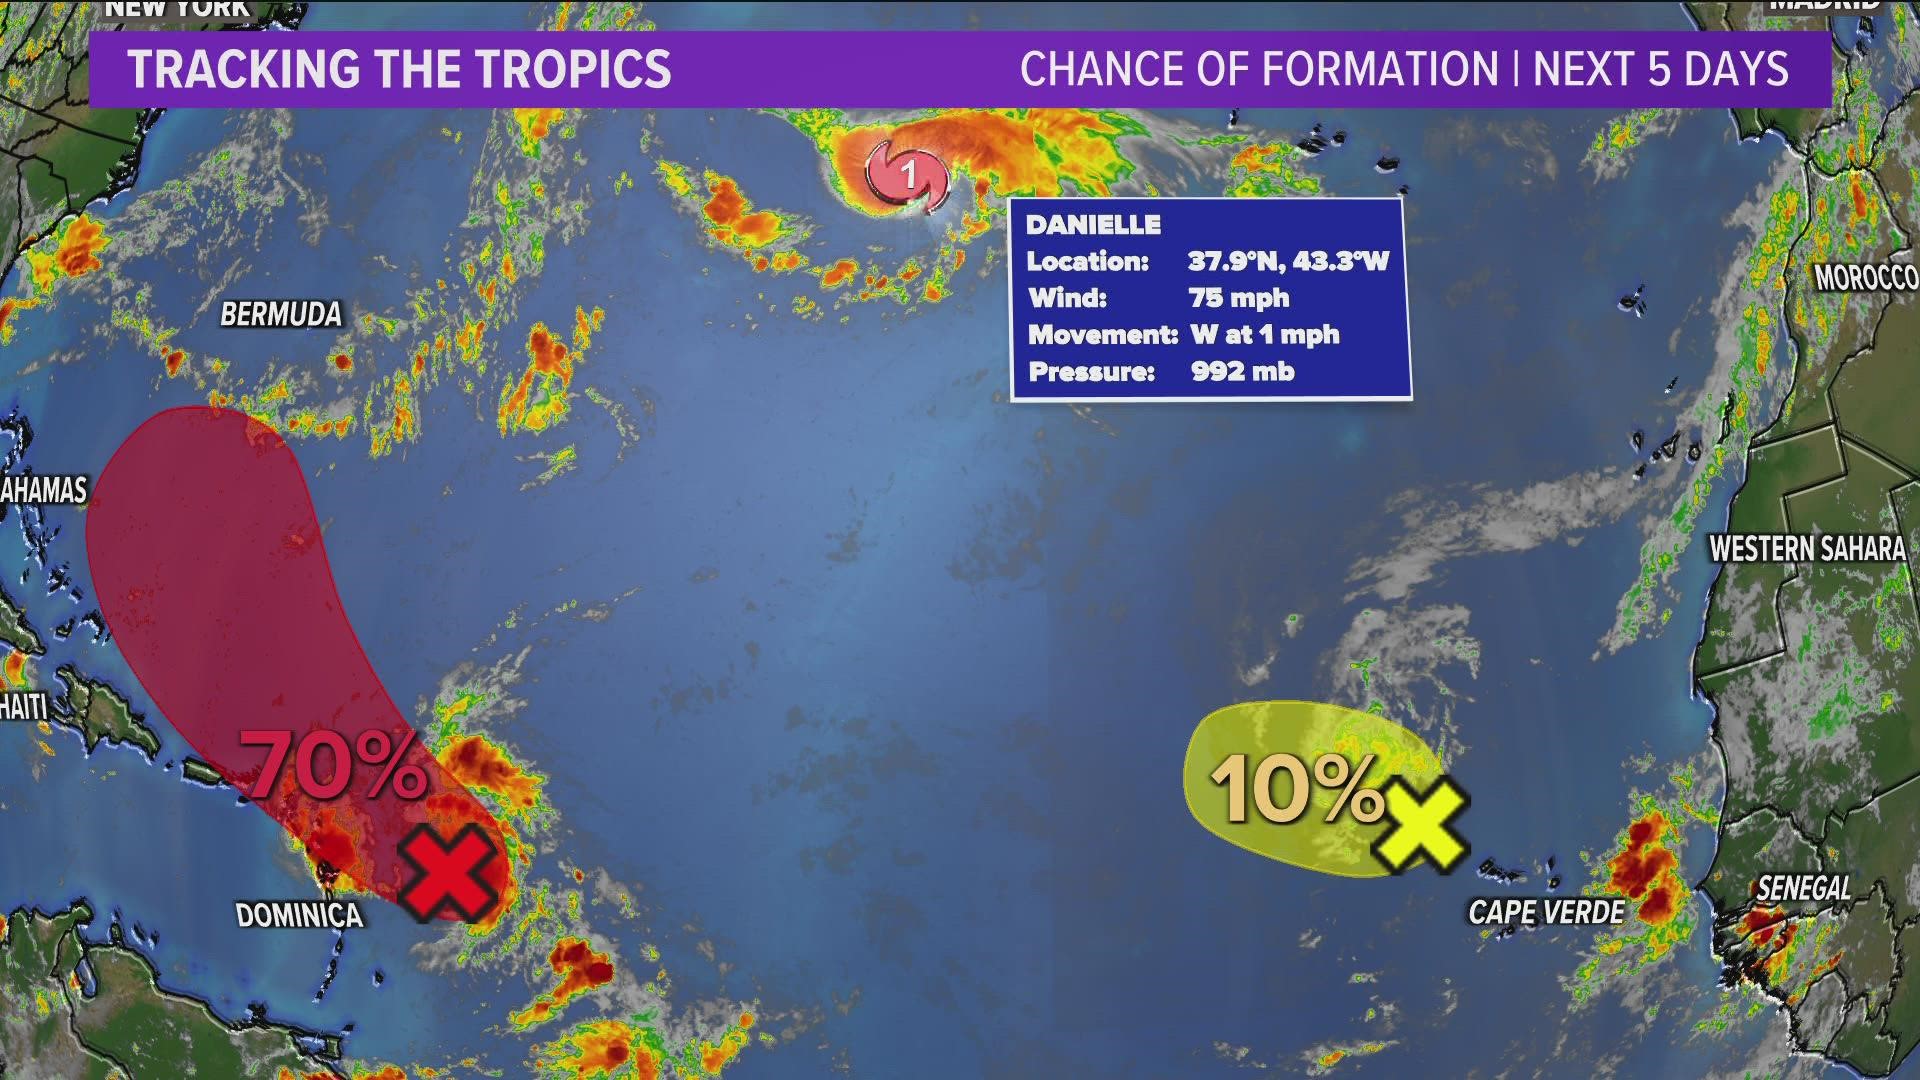 Danielle is a Category 1 Hurricane, becoming the first named storm of the season.